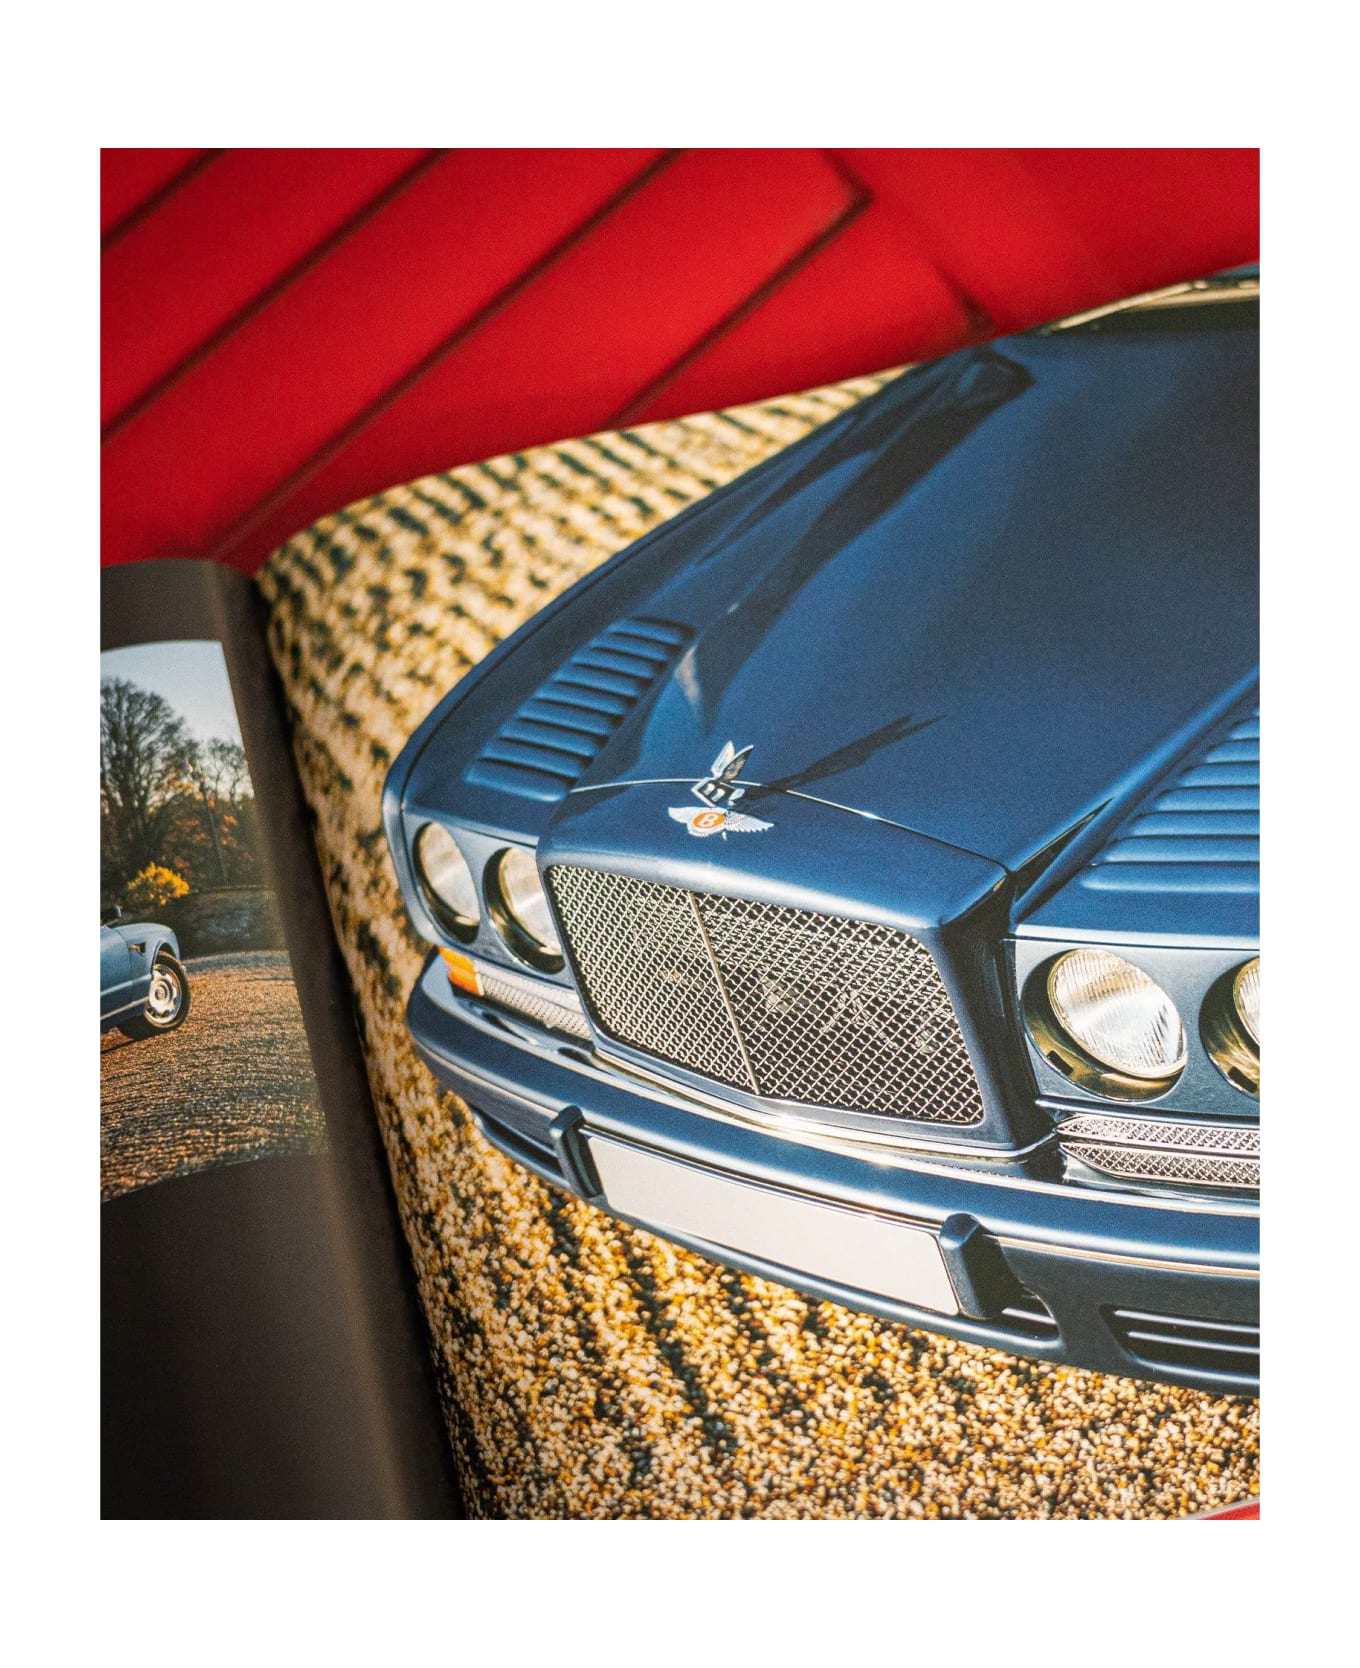 Larusmiani Bentley Book "a Century Of Elegance And Speed"  - Neutral